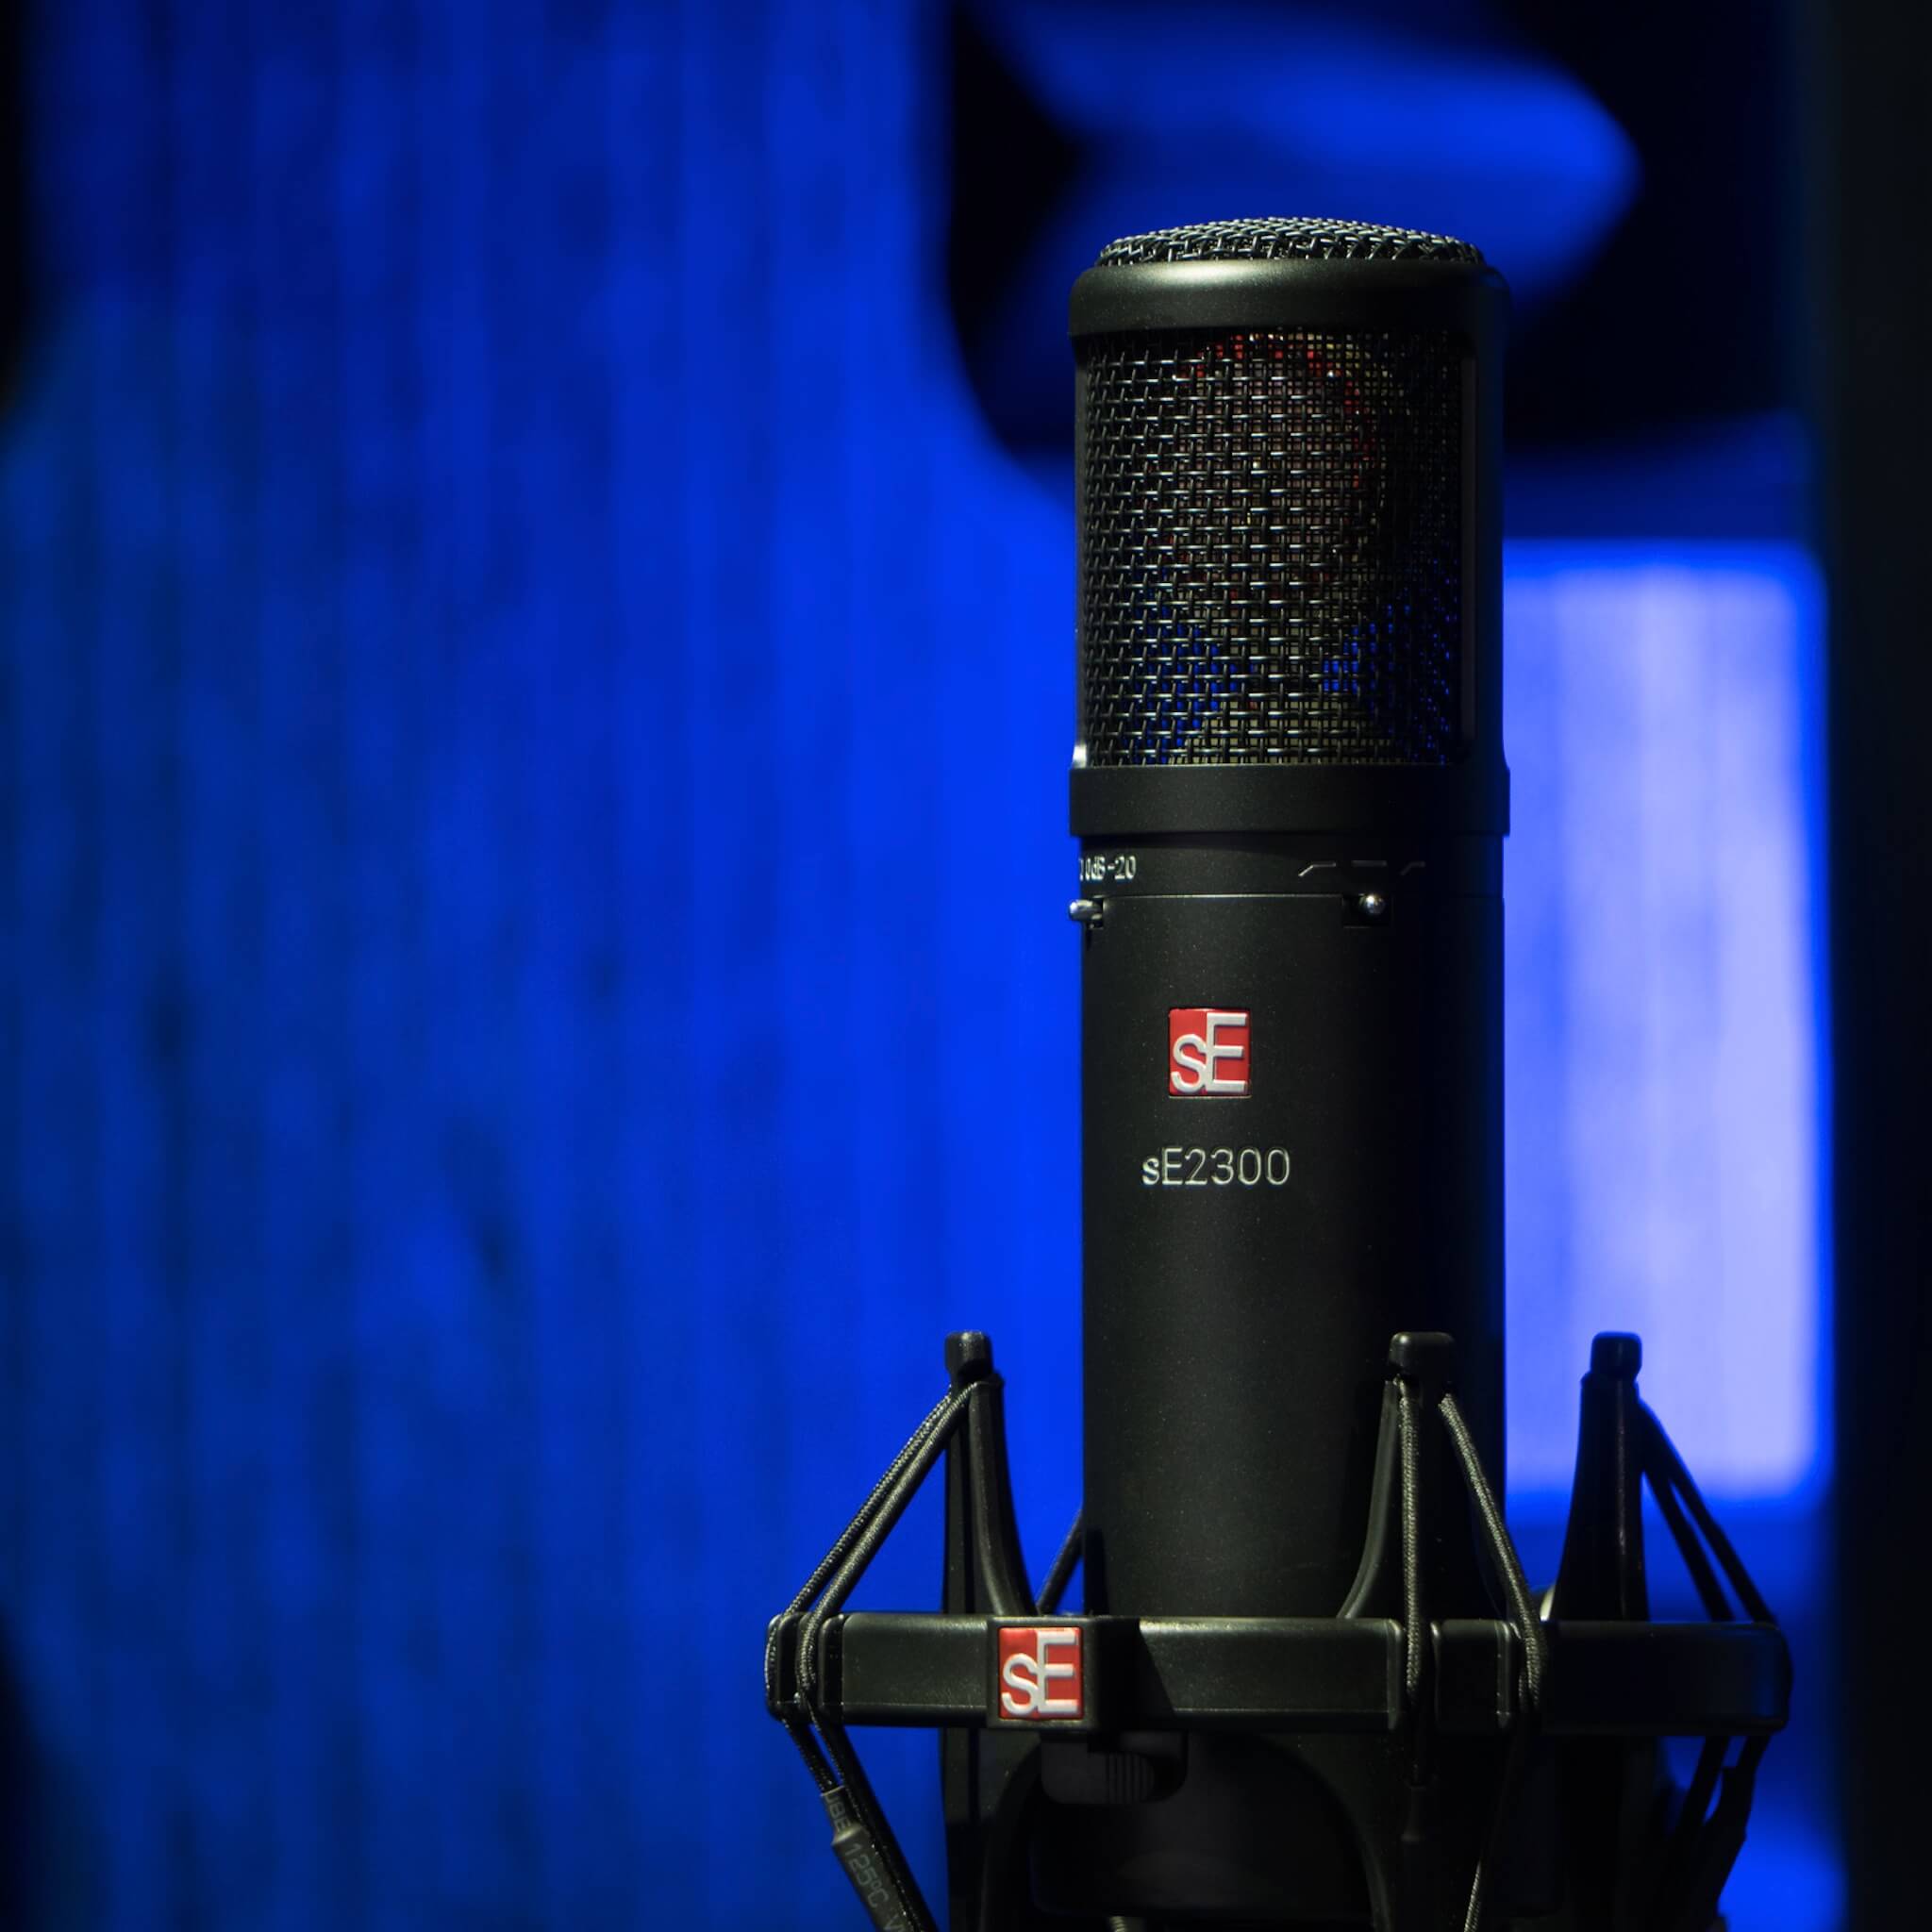 sE Electronics sE2300 - Multi Pattern Large Diaphragm Condenser Microphone, in use in a blue room